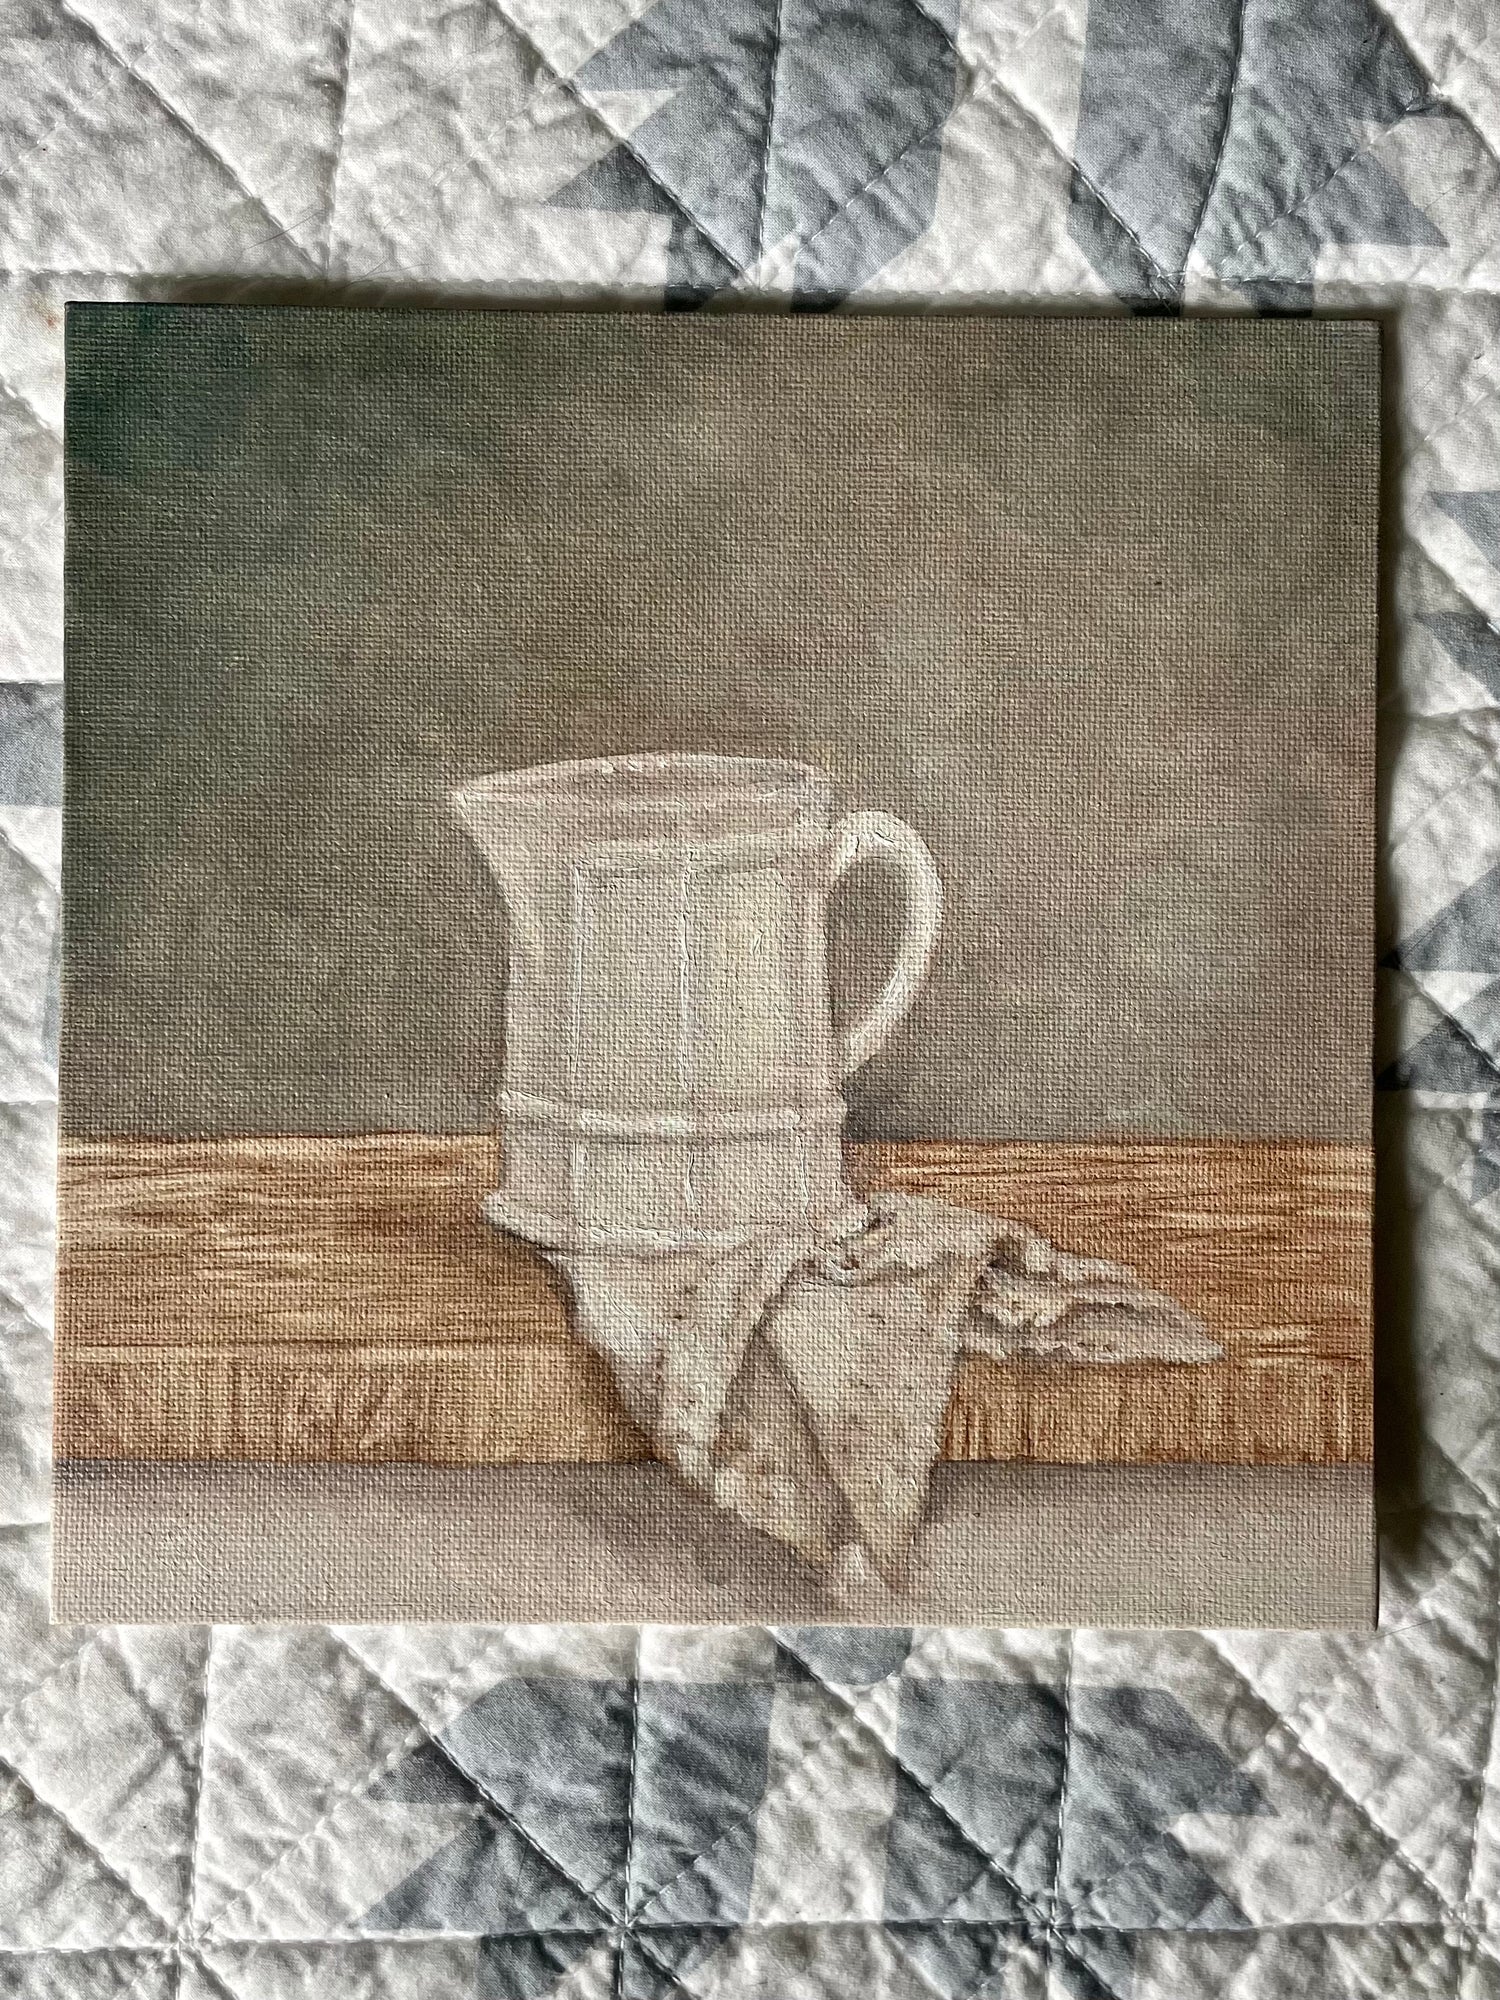 Be Still Collection, White Ironstone Cream Pitcher w/antique napkin on a soft wooden surface